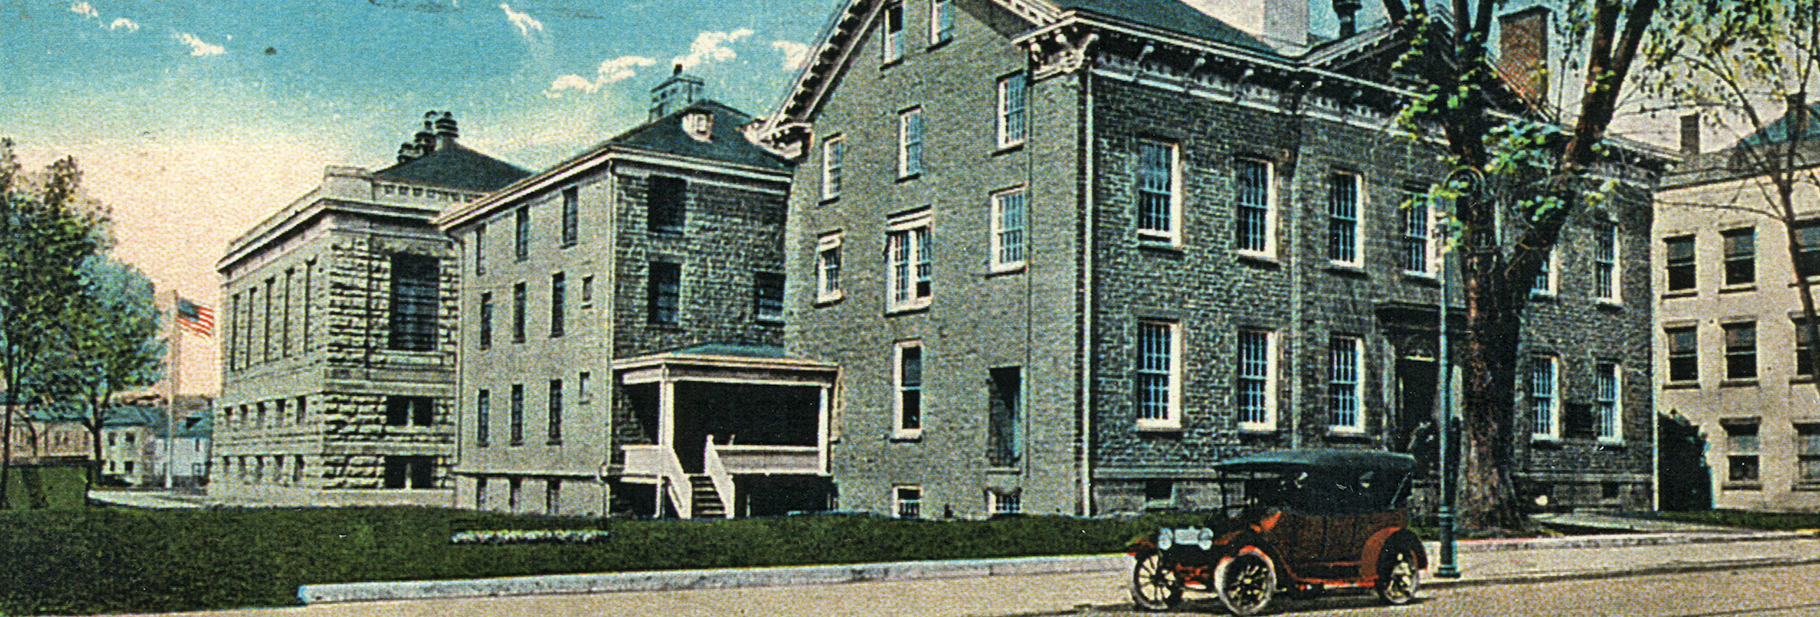 Historic postcard of the Ulster County Courthouse